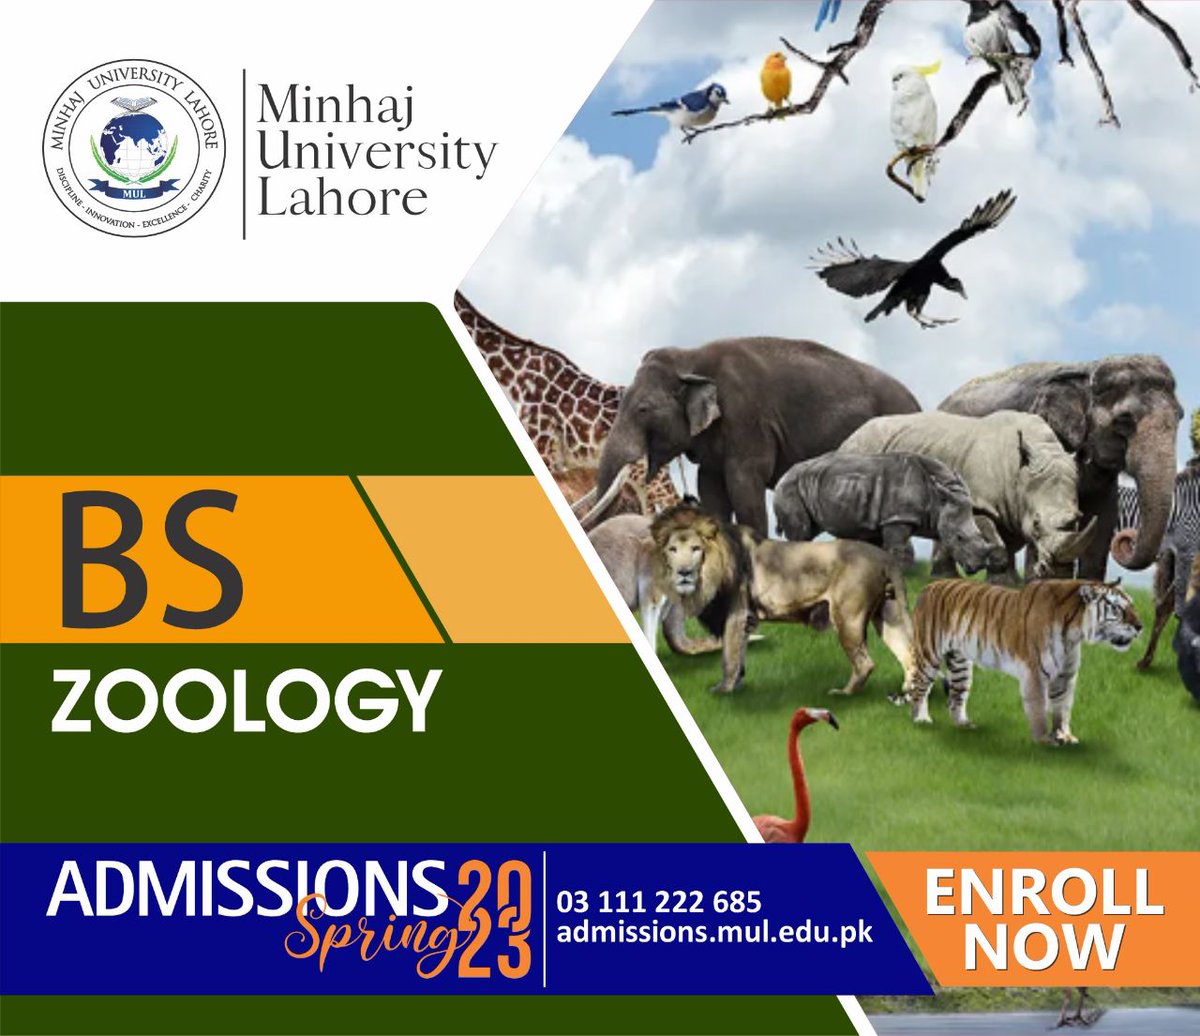 ADMISSIONS OPEN SPRING 2023
BS Zoology
School of Zoology
For more details: 
mul.edu.pk/admissions-ope…
Apply Online:
admission.mul.edu.pk
#AdmissionsOpenSpring2023
#AdmissionsSpring2023
#AdmissionsOpen2023
#Admissions2023
#2023Admissions 
#AdmissionsOpen
#UniversityAdmissions